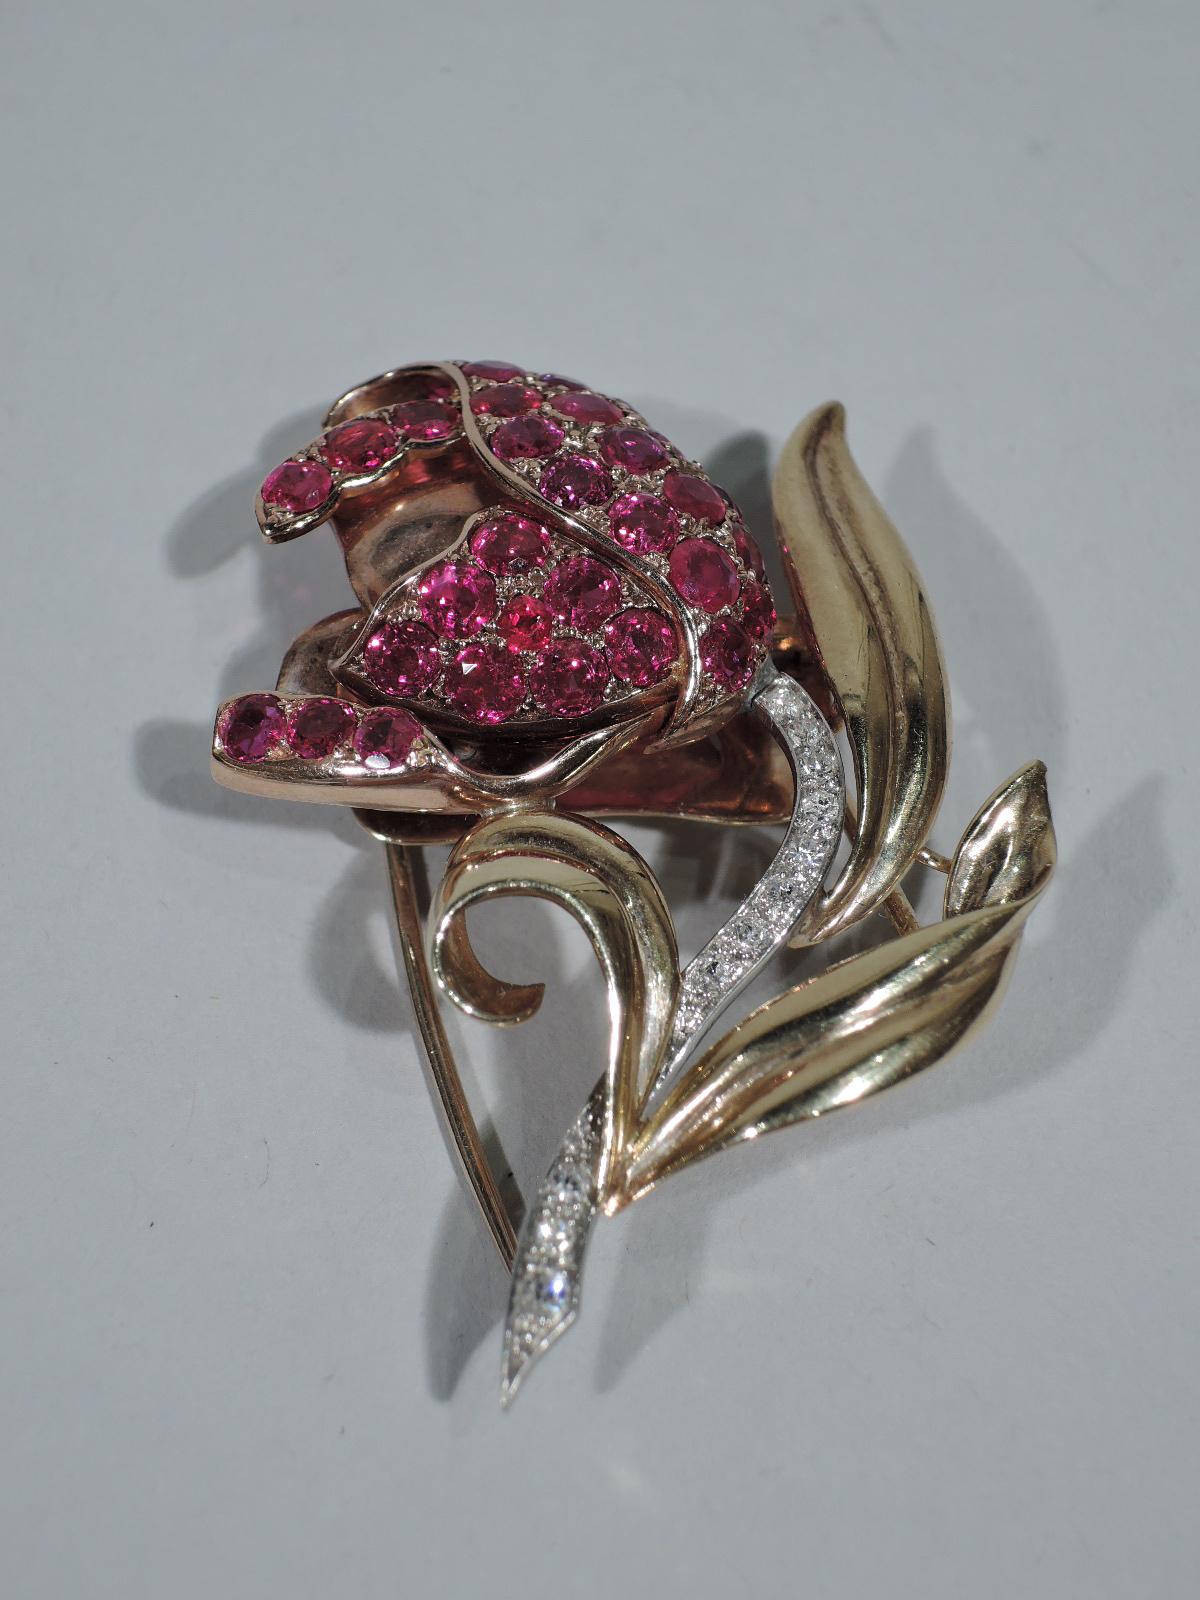 Beautiful 14k gold flower brooch comprising petals inset with 33 rubies (approx. 3 carats) on white-gold stem encrusted with pave diamonds. The flower is framed by 3 scrolled yellow gold leaves. United States, ca 1940s.